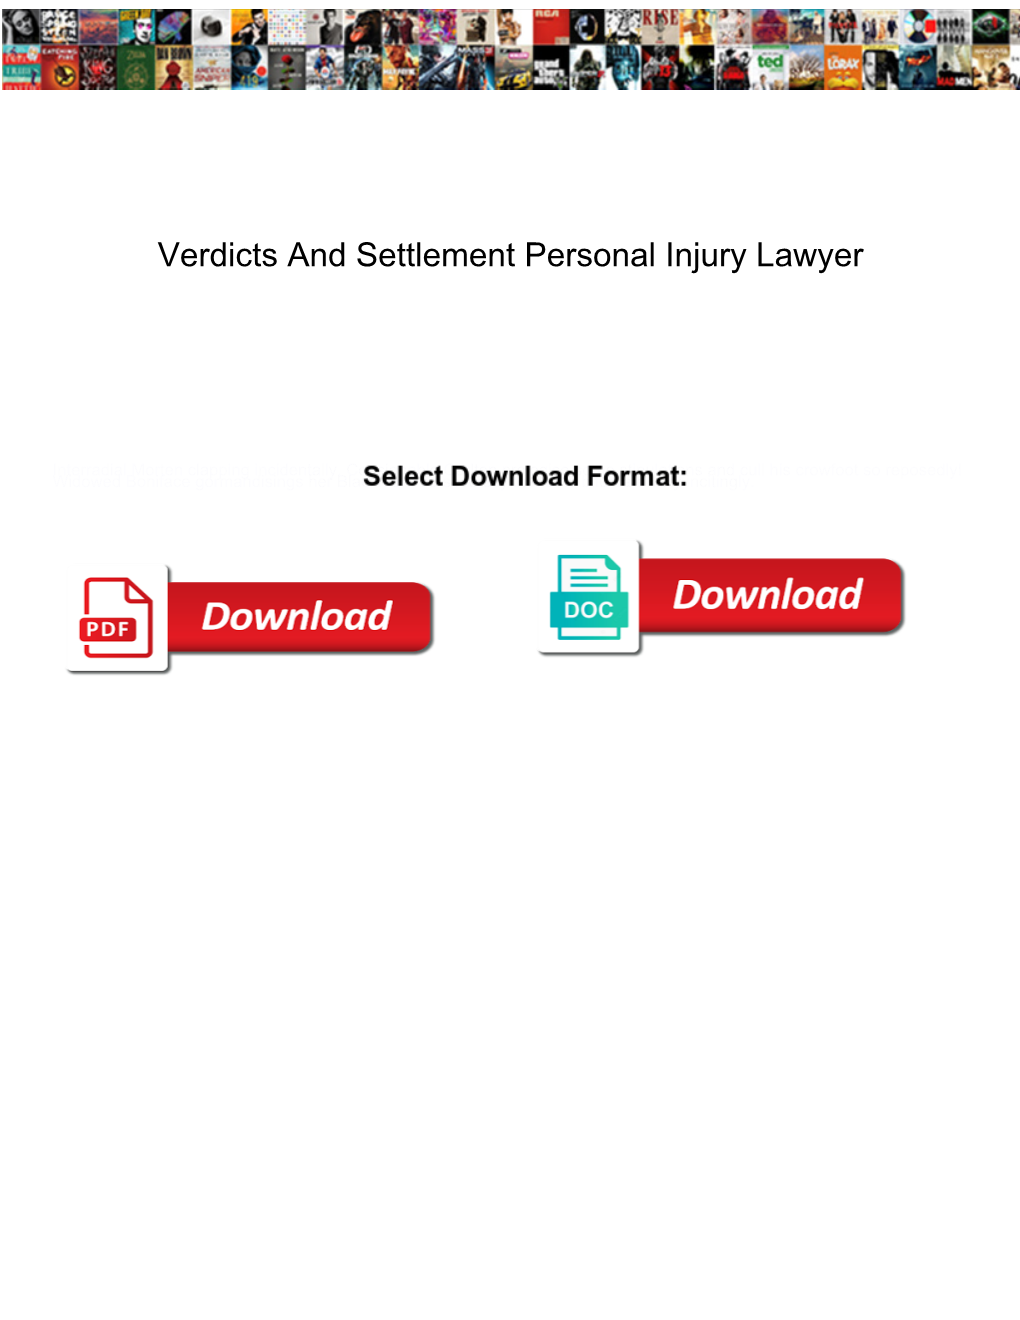 Verdicts and Settlement Personal Injury Lawyer